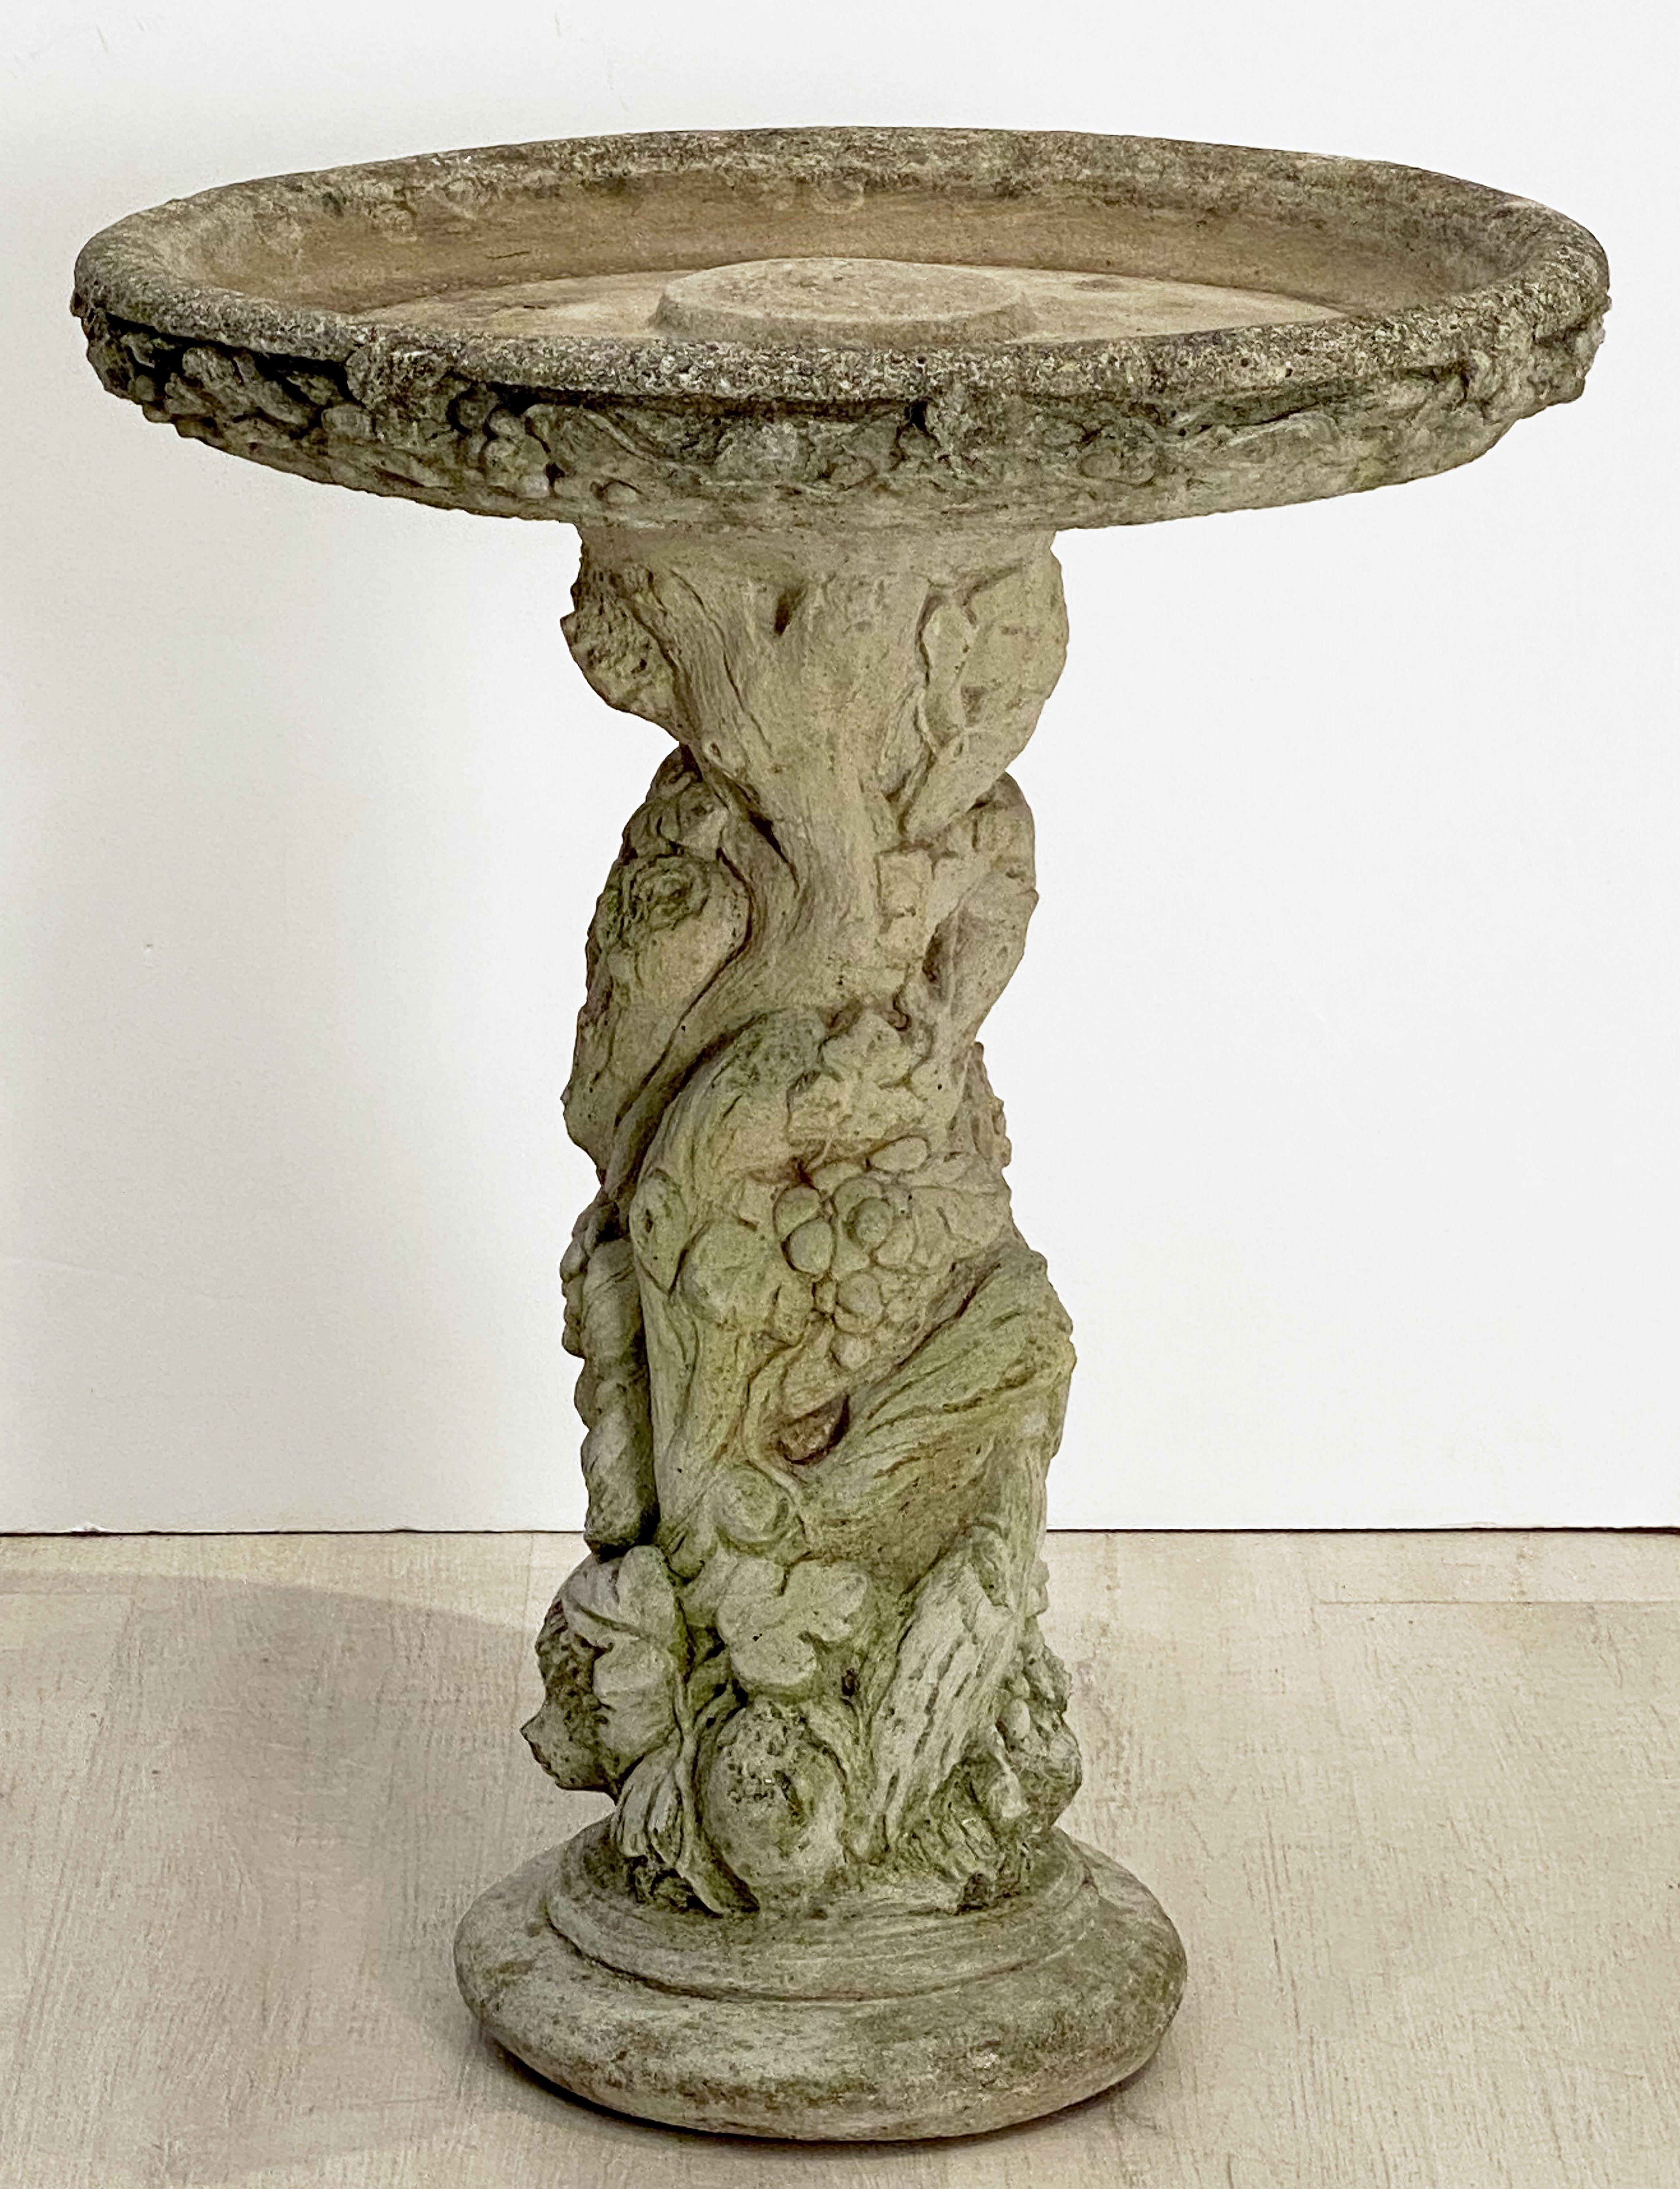 Large English Garden Stone Bird Bath with Faux Bois Relief 7